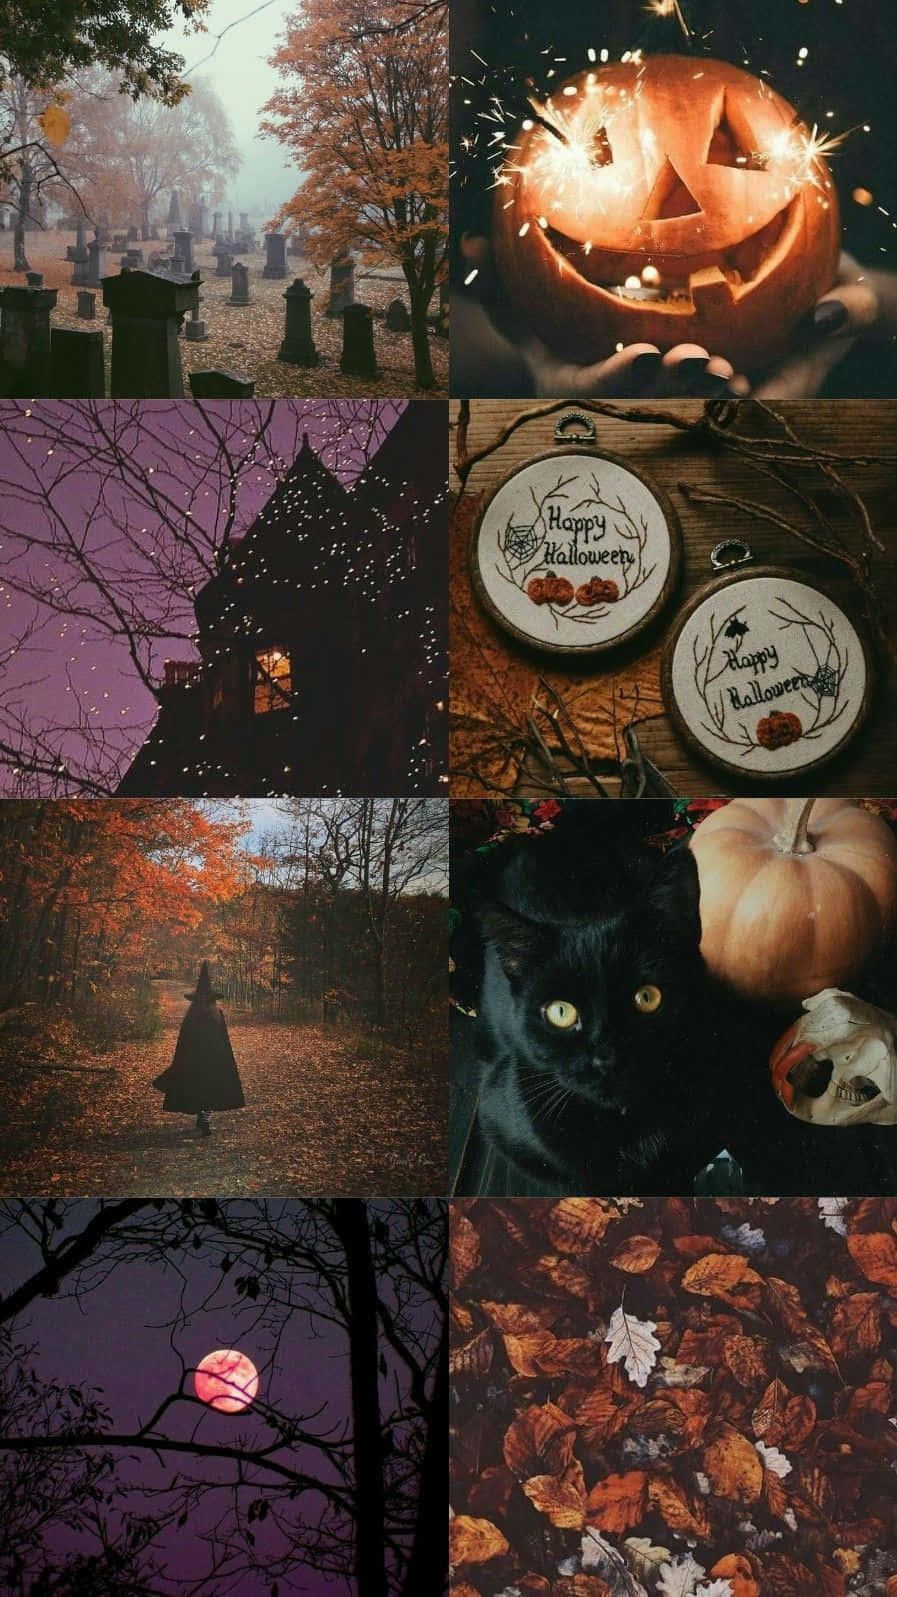 Get into the Halloween spirit this year with this spooky aesthetic!